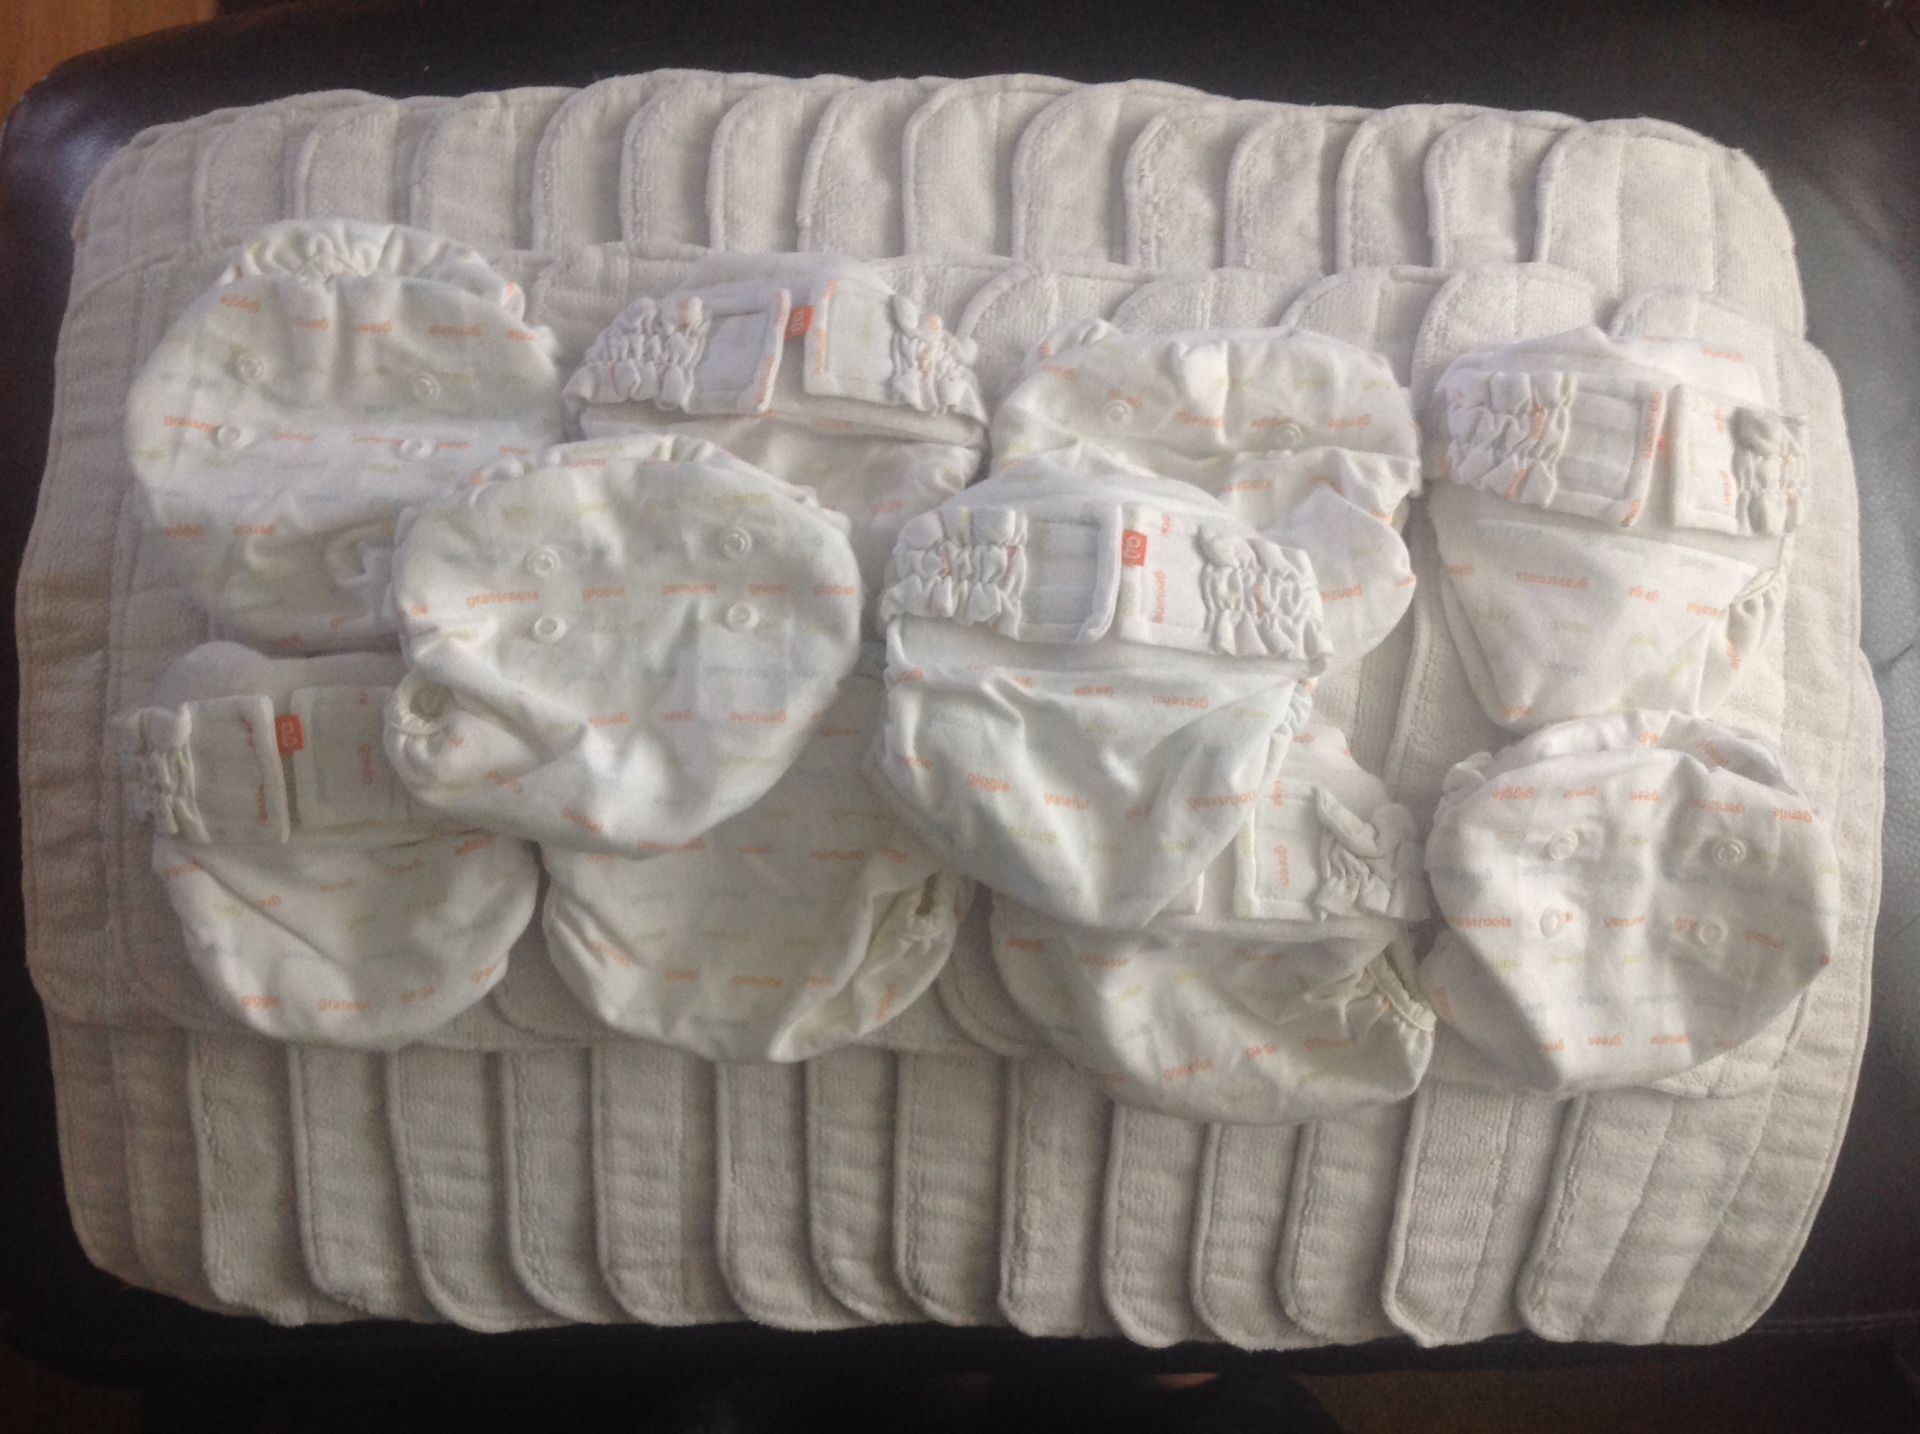 SIZE X-SMALL (NEWBORN) GDIAPERS WITH UMBILICAL CORD SNAP DOWN AND 44 CLOTH INSERTS